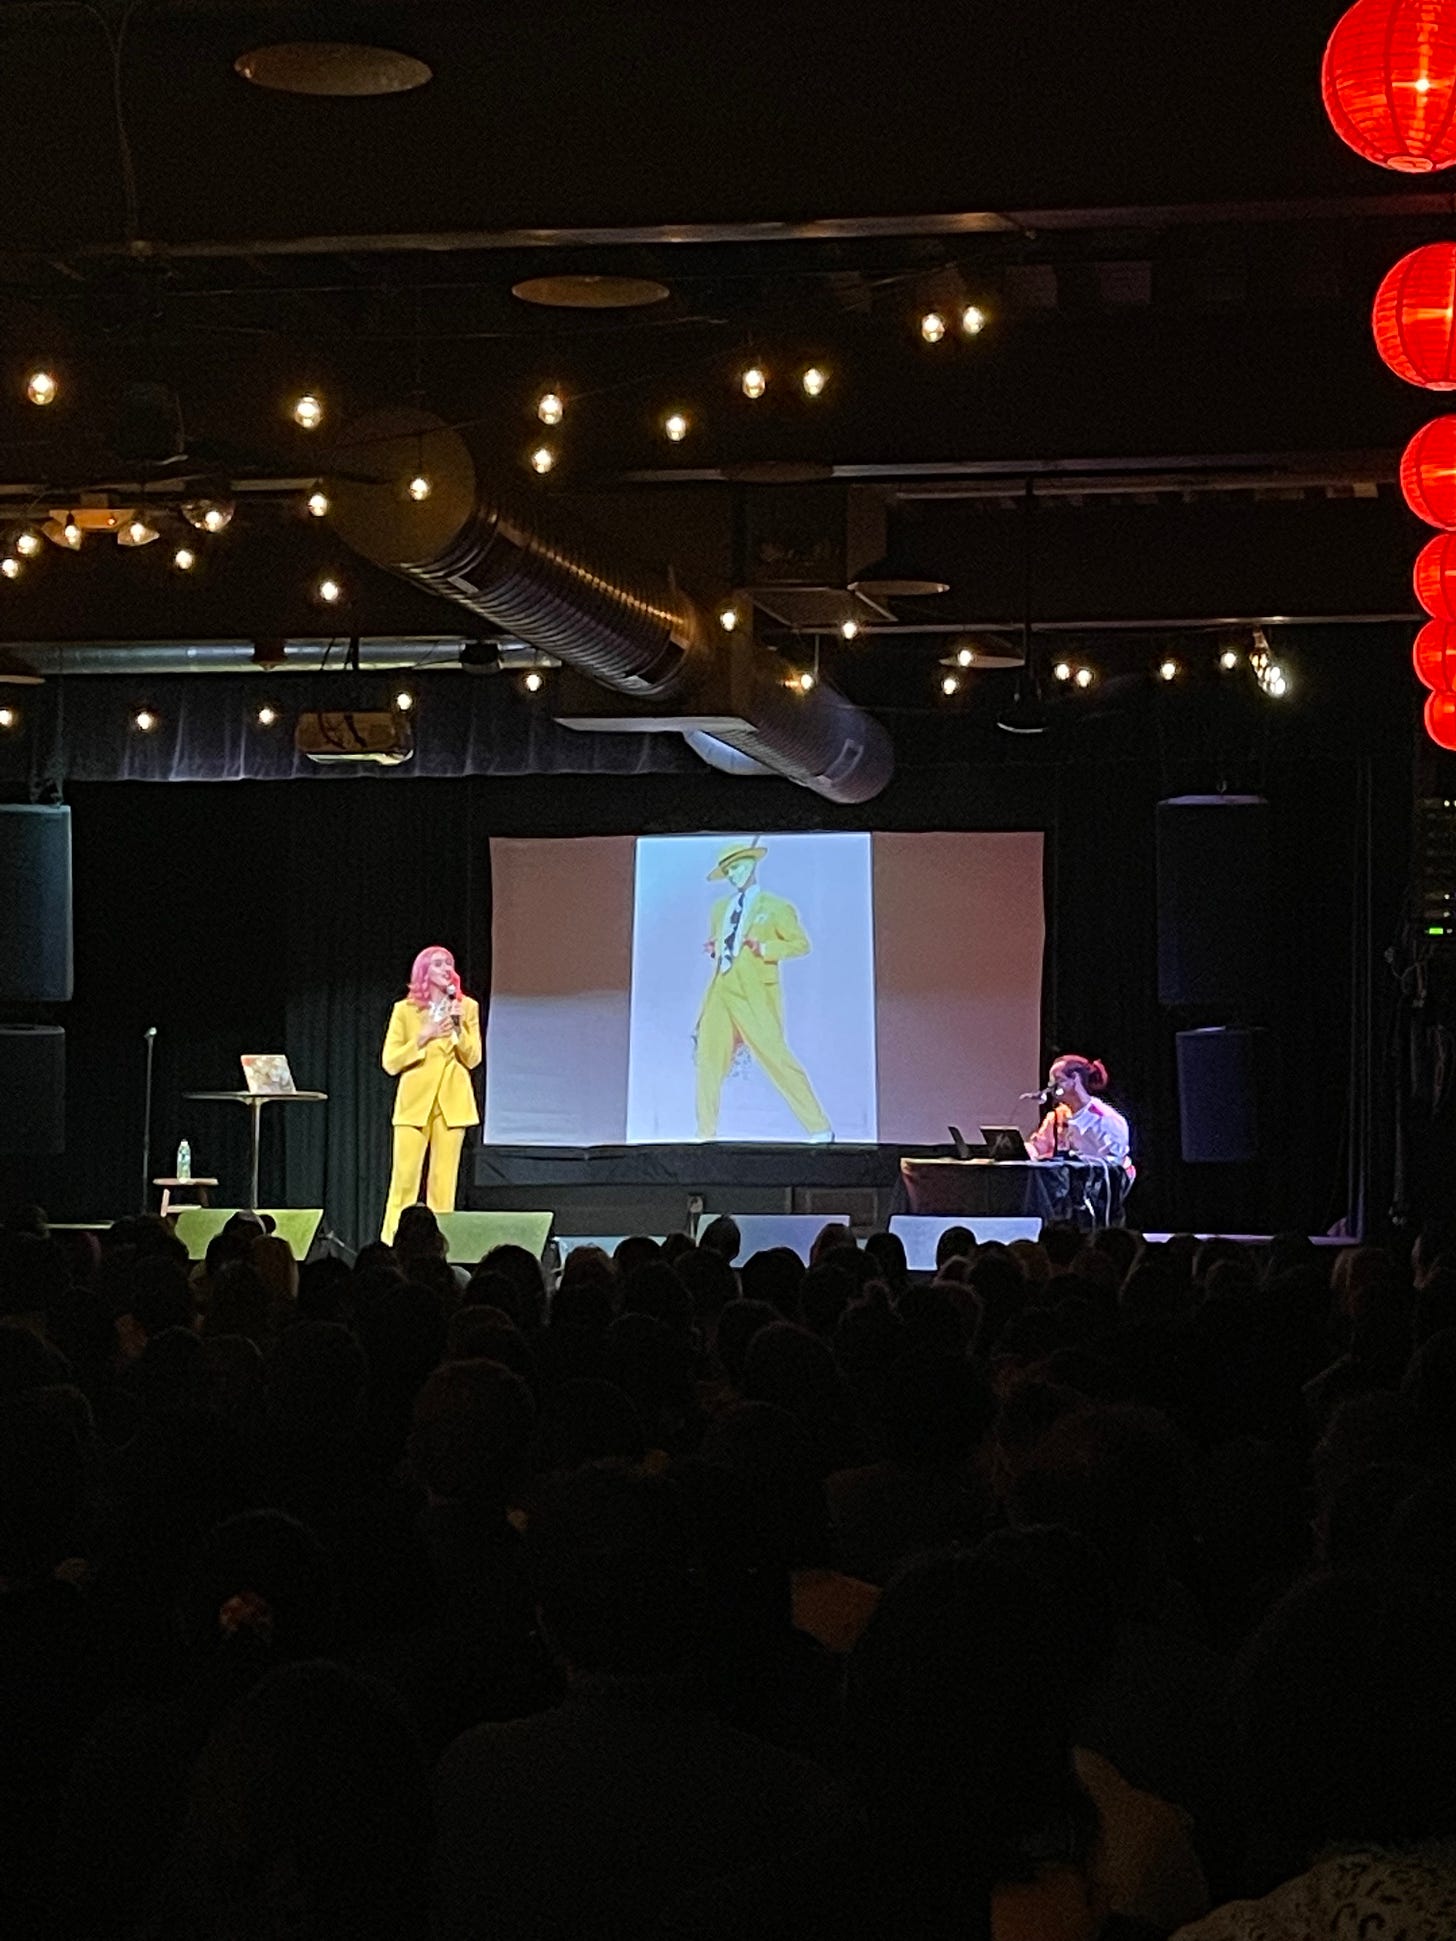 photo of Nora McInerny and Marcel Malekebu on stage at Motorco Music Hall in Durham, North Carolina. Nora is wearing a yellow suit and has hot pink hair